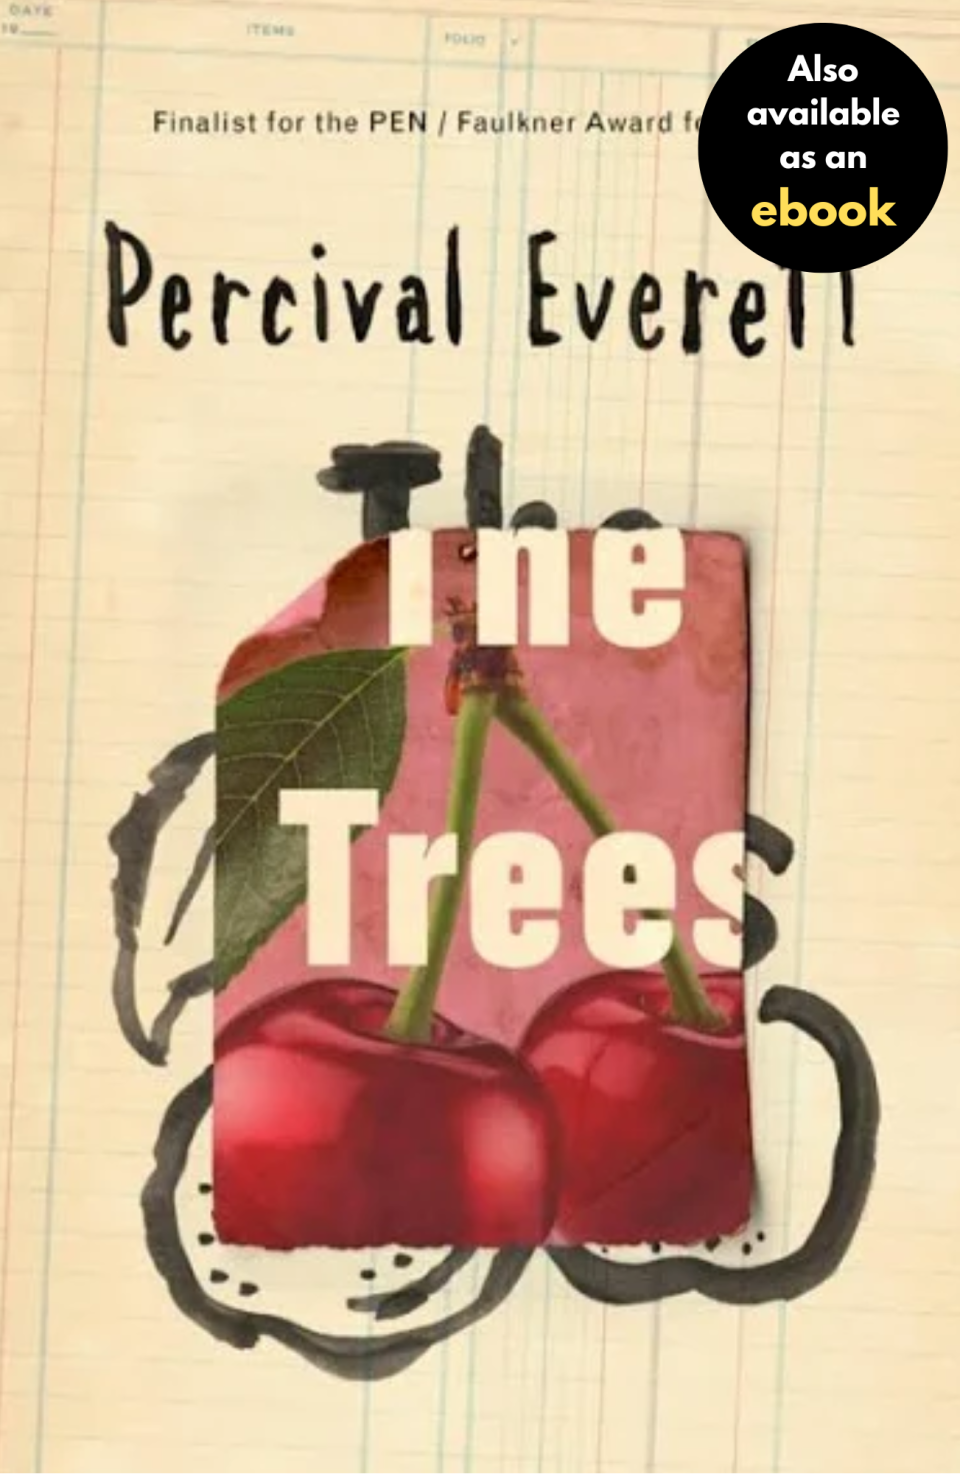 Shows the cover art for The Trees by Percival Everett